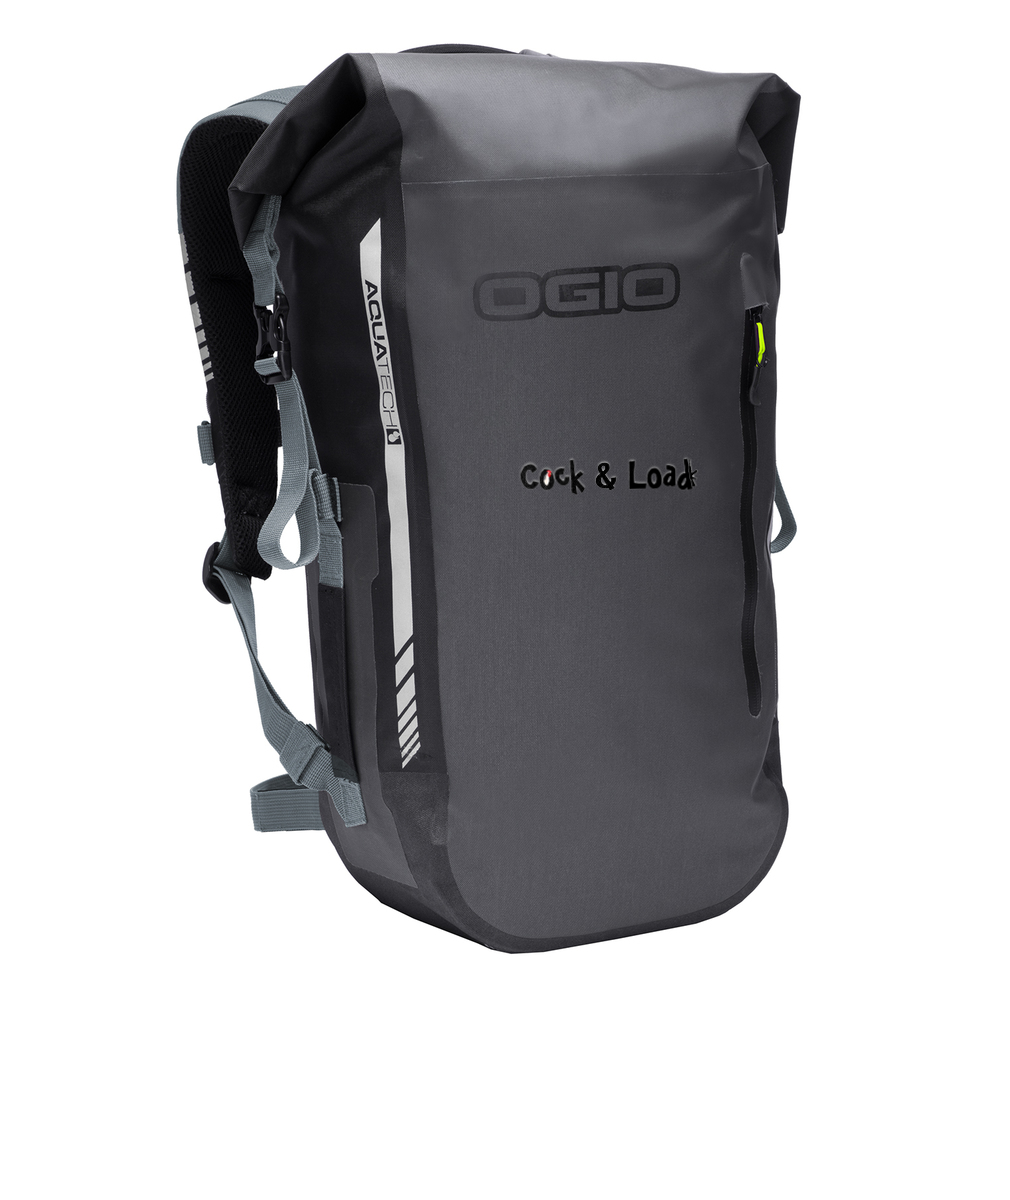 Cock n load OGIO All Elements Pack